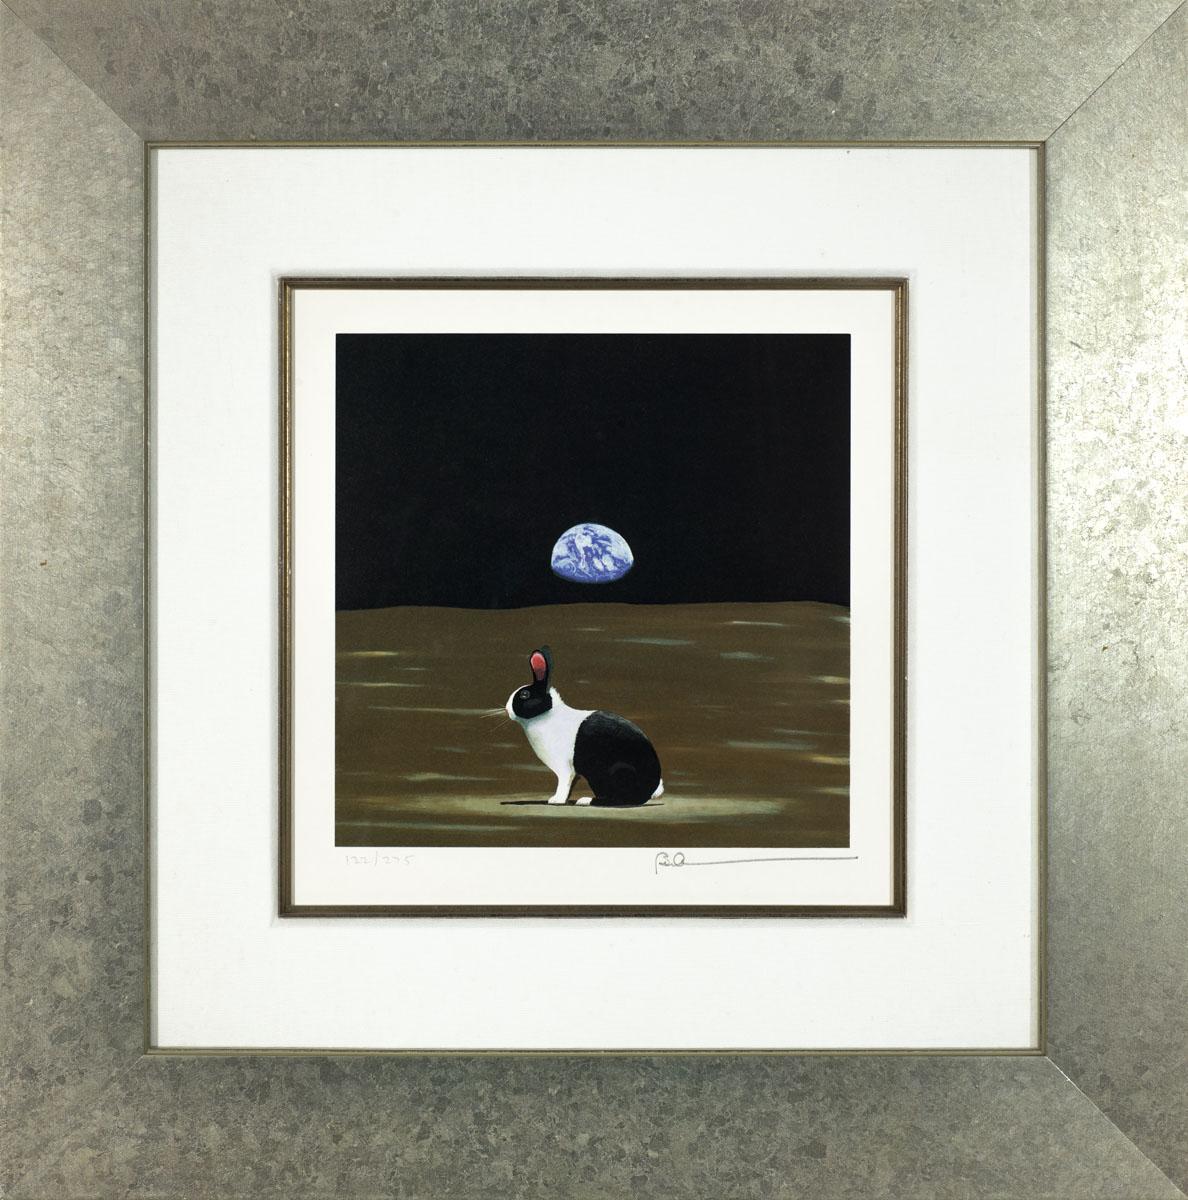 A Hare Out of Place I (Outer-Space) is a lithograph on paper, 9 x9